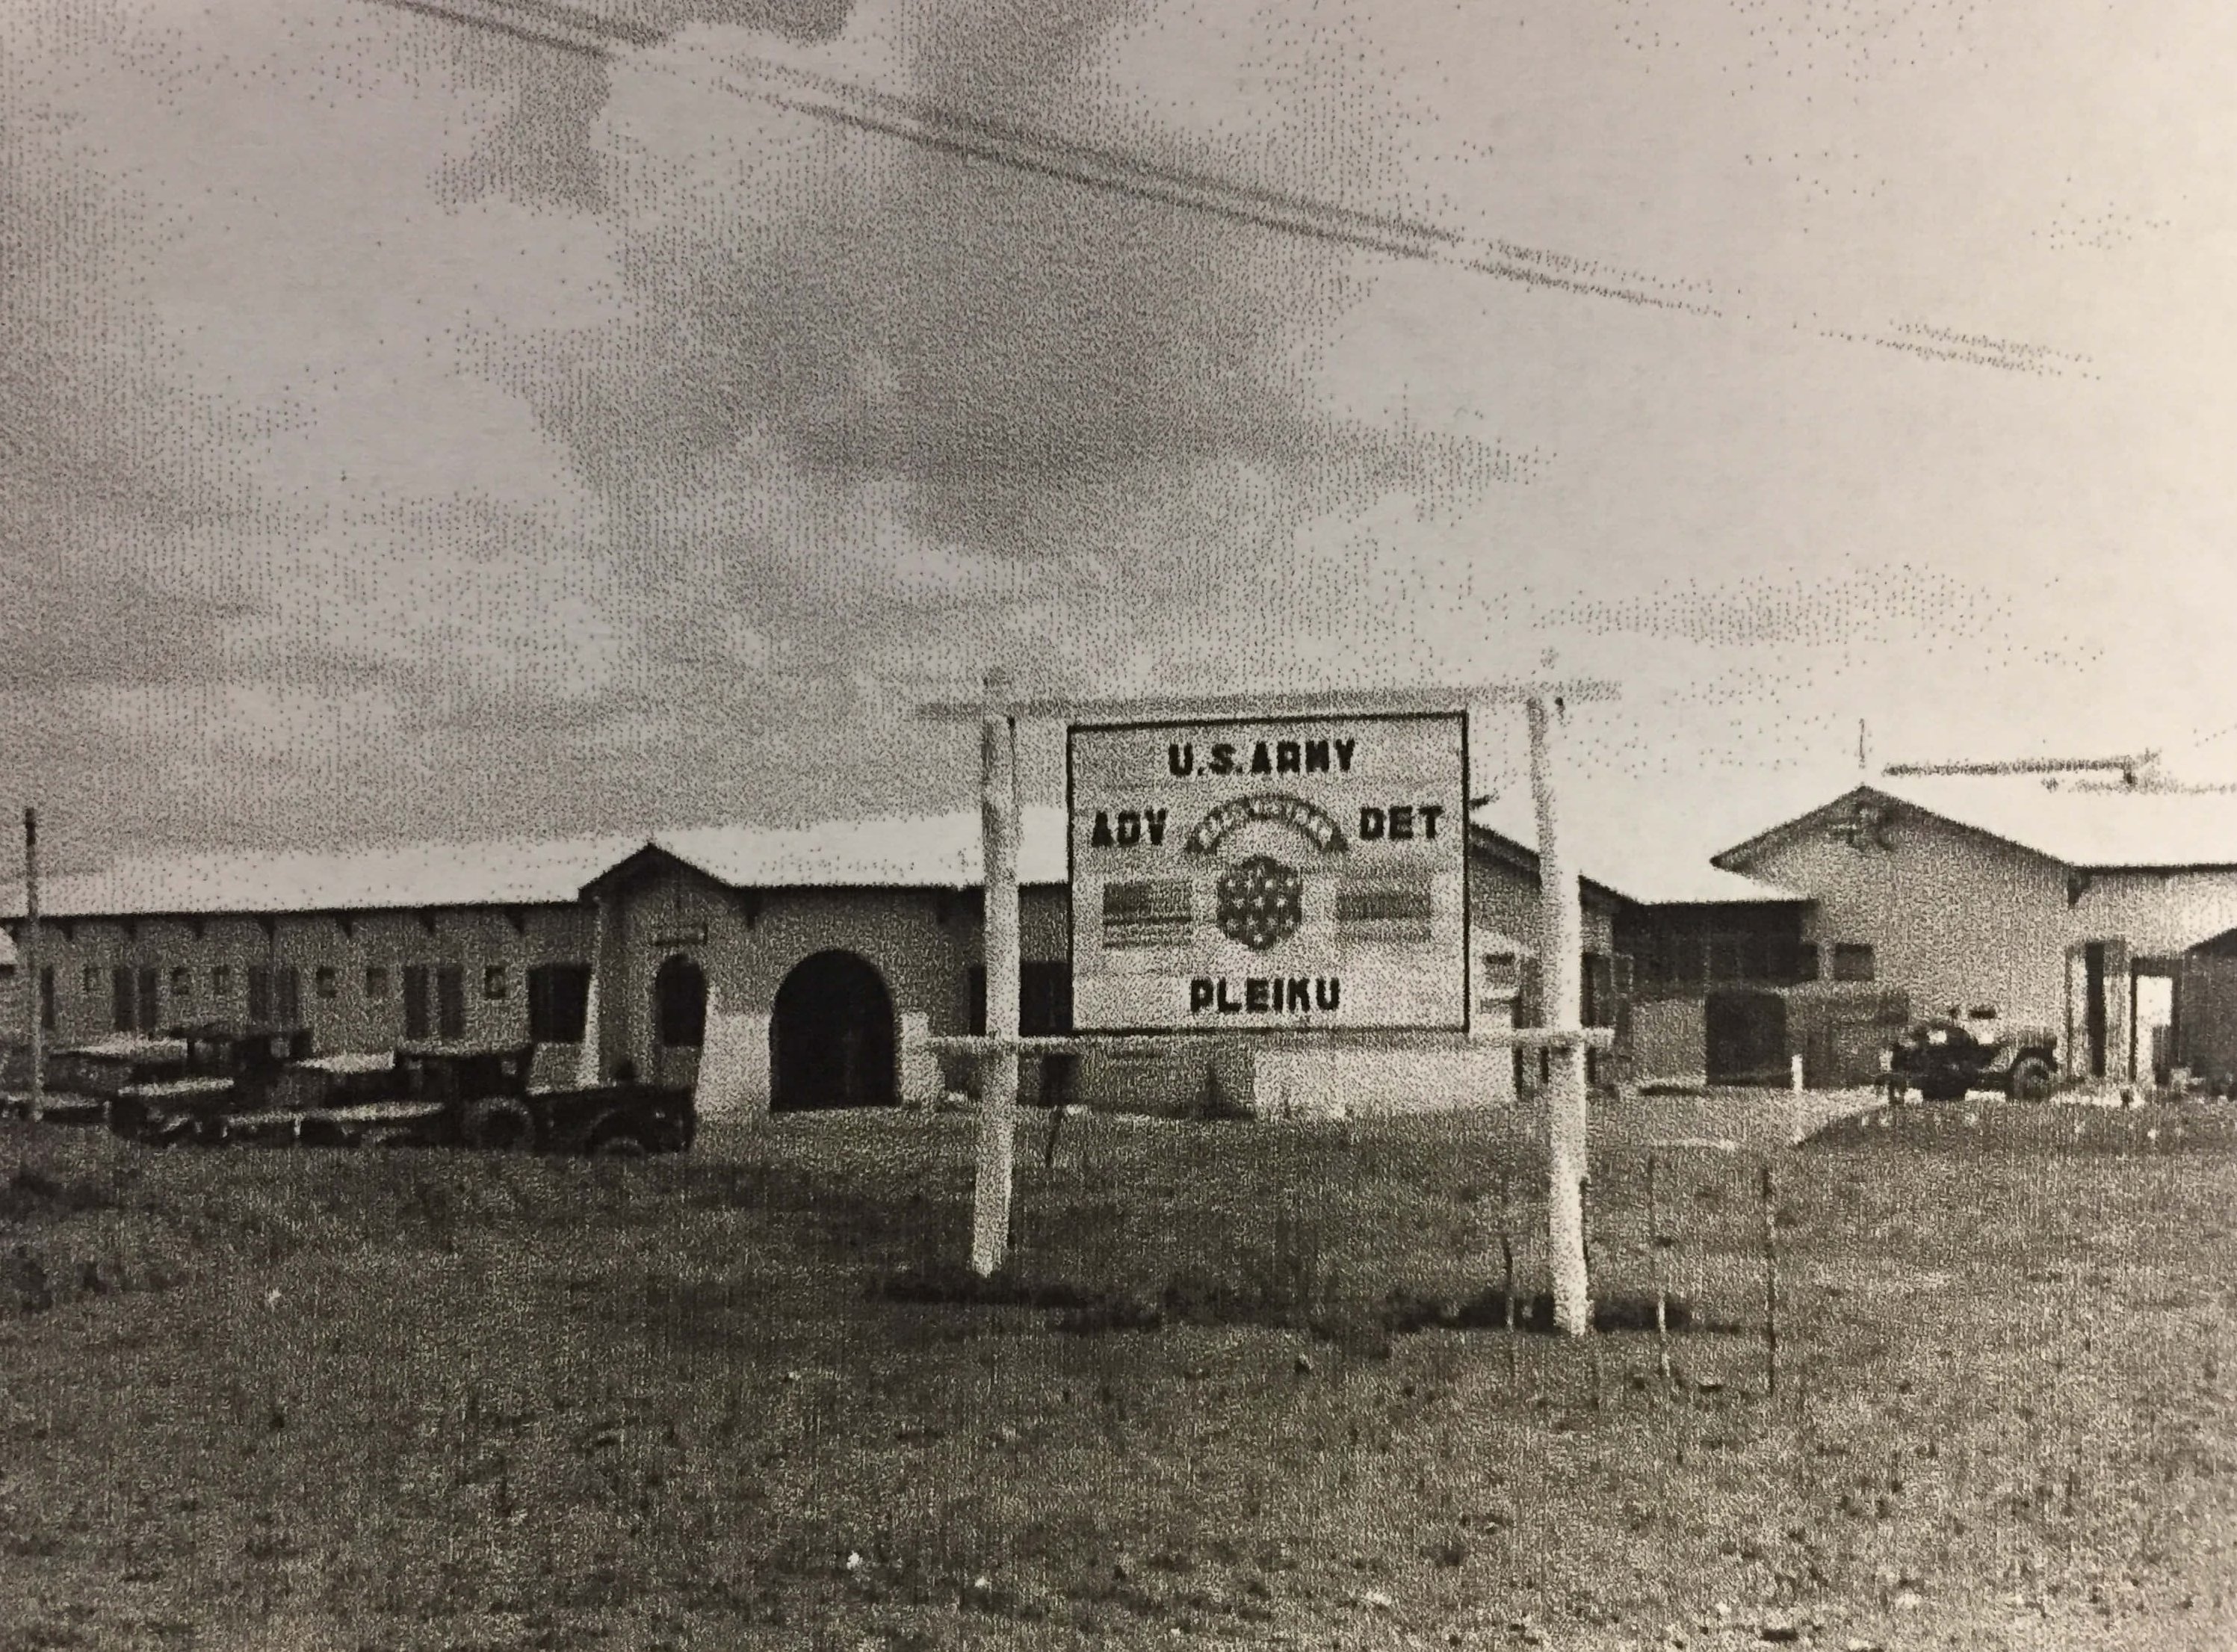 A sign that says "US Army ADV DET Pleiku" in front of some buildings.